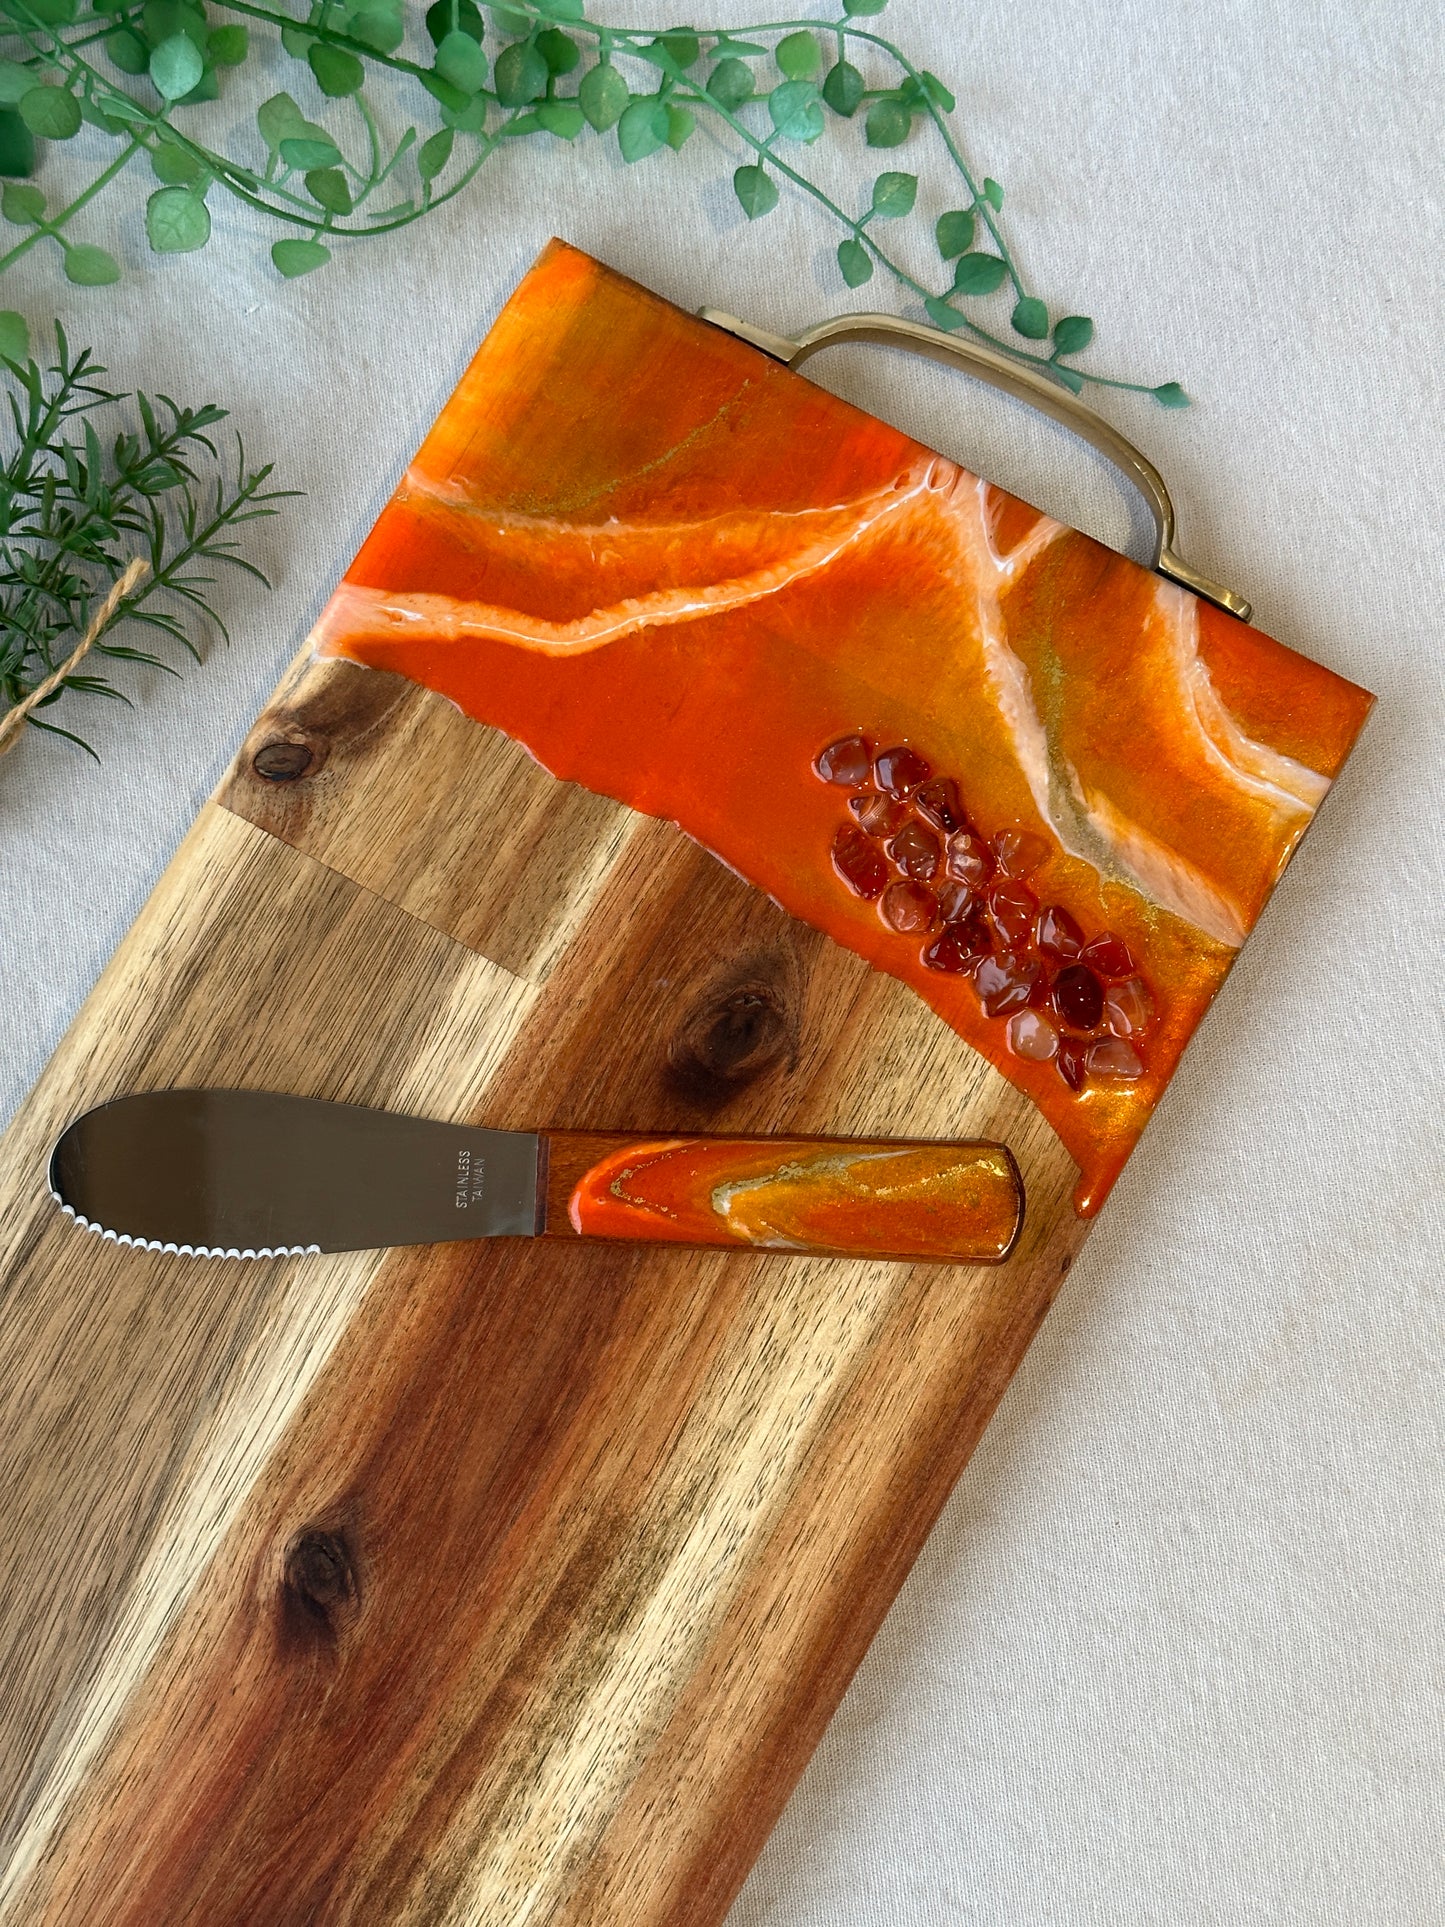 SERVING BOARD - metallic orange resin with real red carnelian gems, serving board with FREE matching knife - READY TO POST